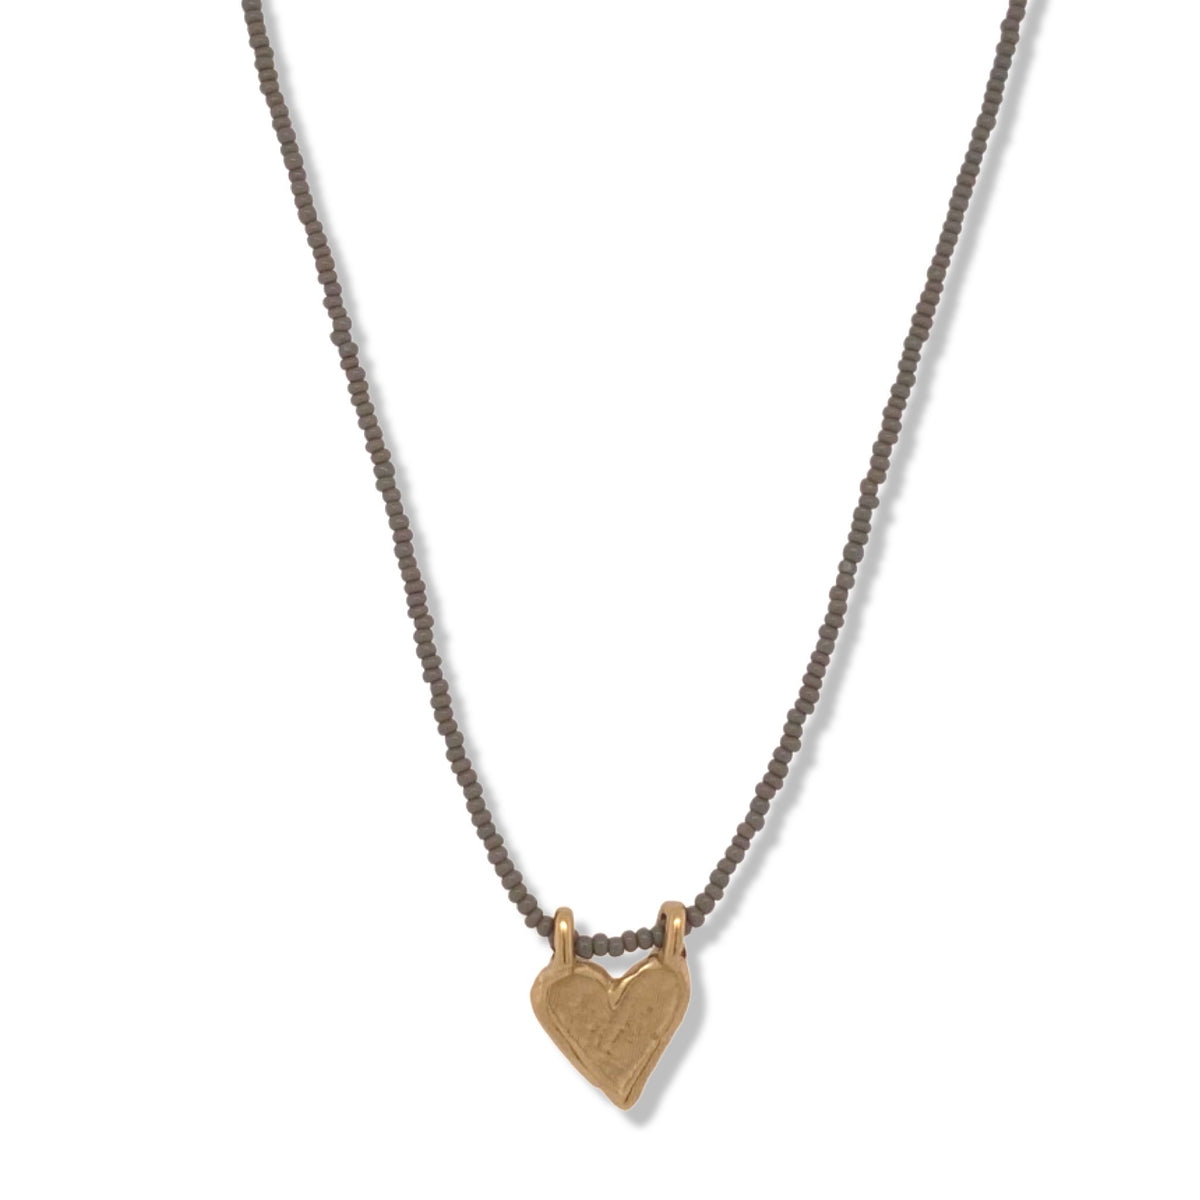 Mini Heart Charm Necklace in Gold on Micro Charcoal Beads | Keely Smith Jewelry | Nantucket